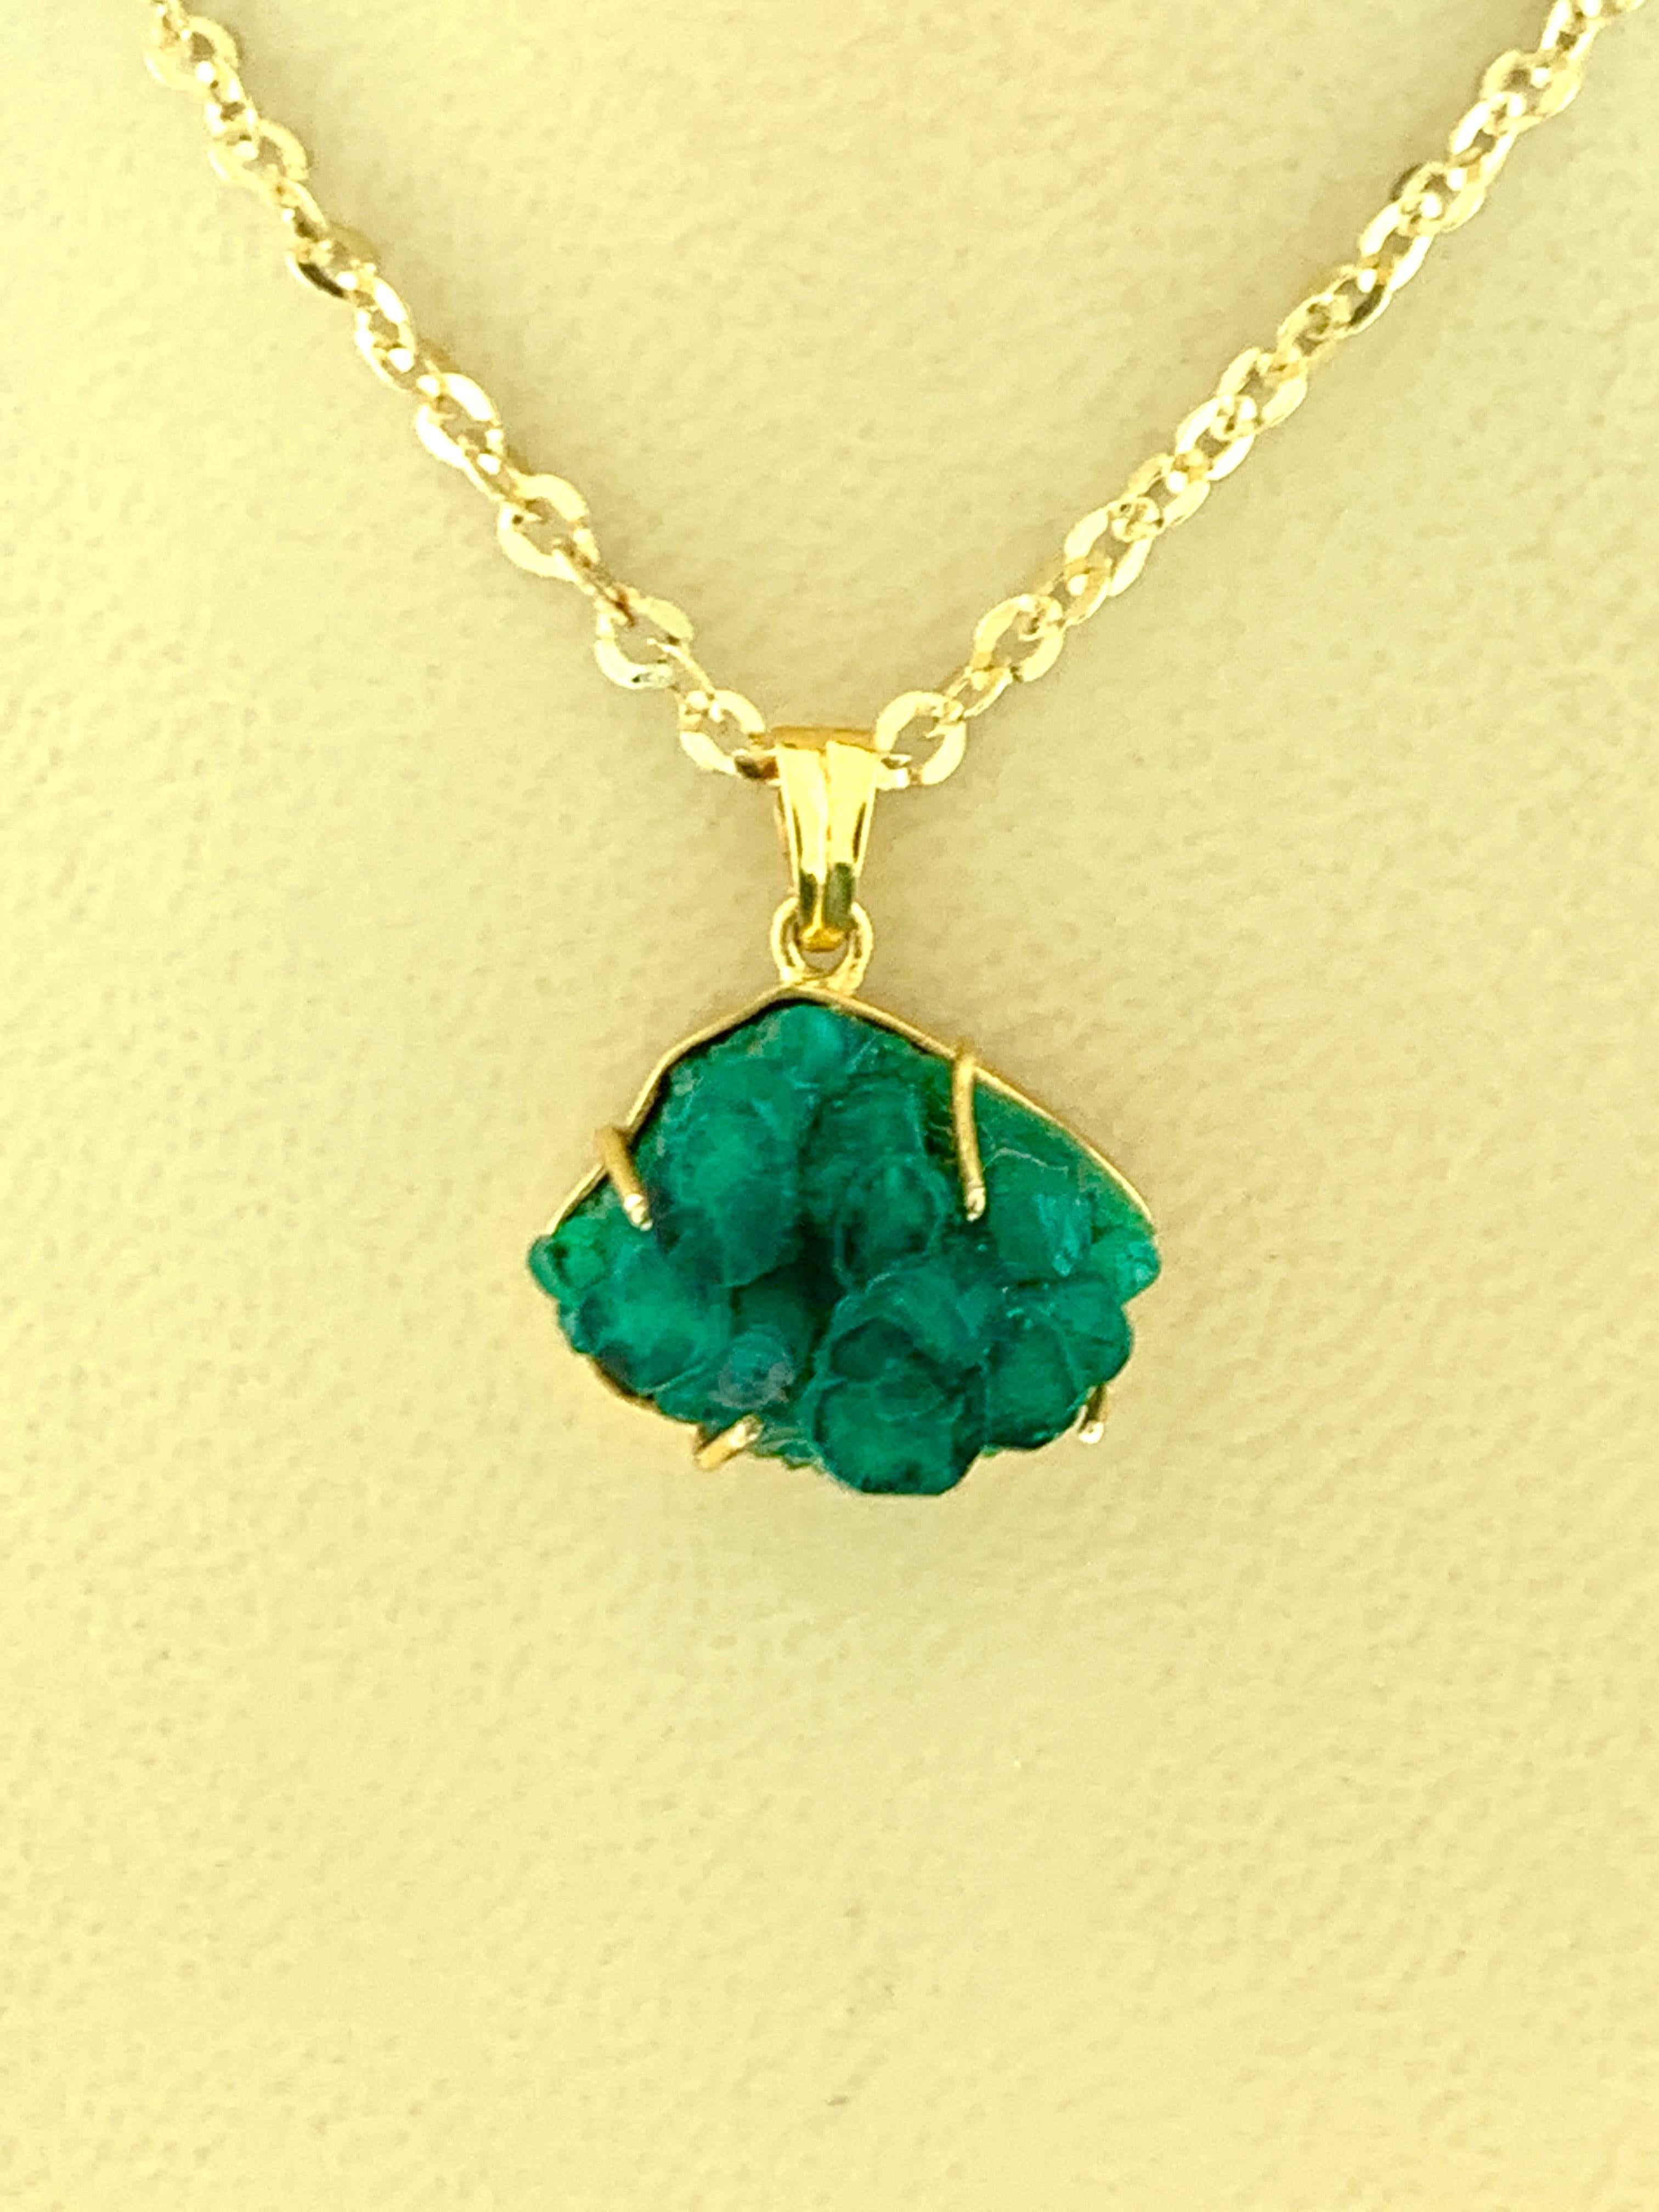 19 Carat Colombian Emerald Rough Pendent/Necklace 18 Karat Gold with Chain 2